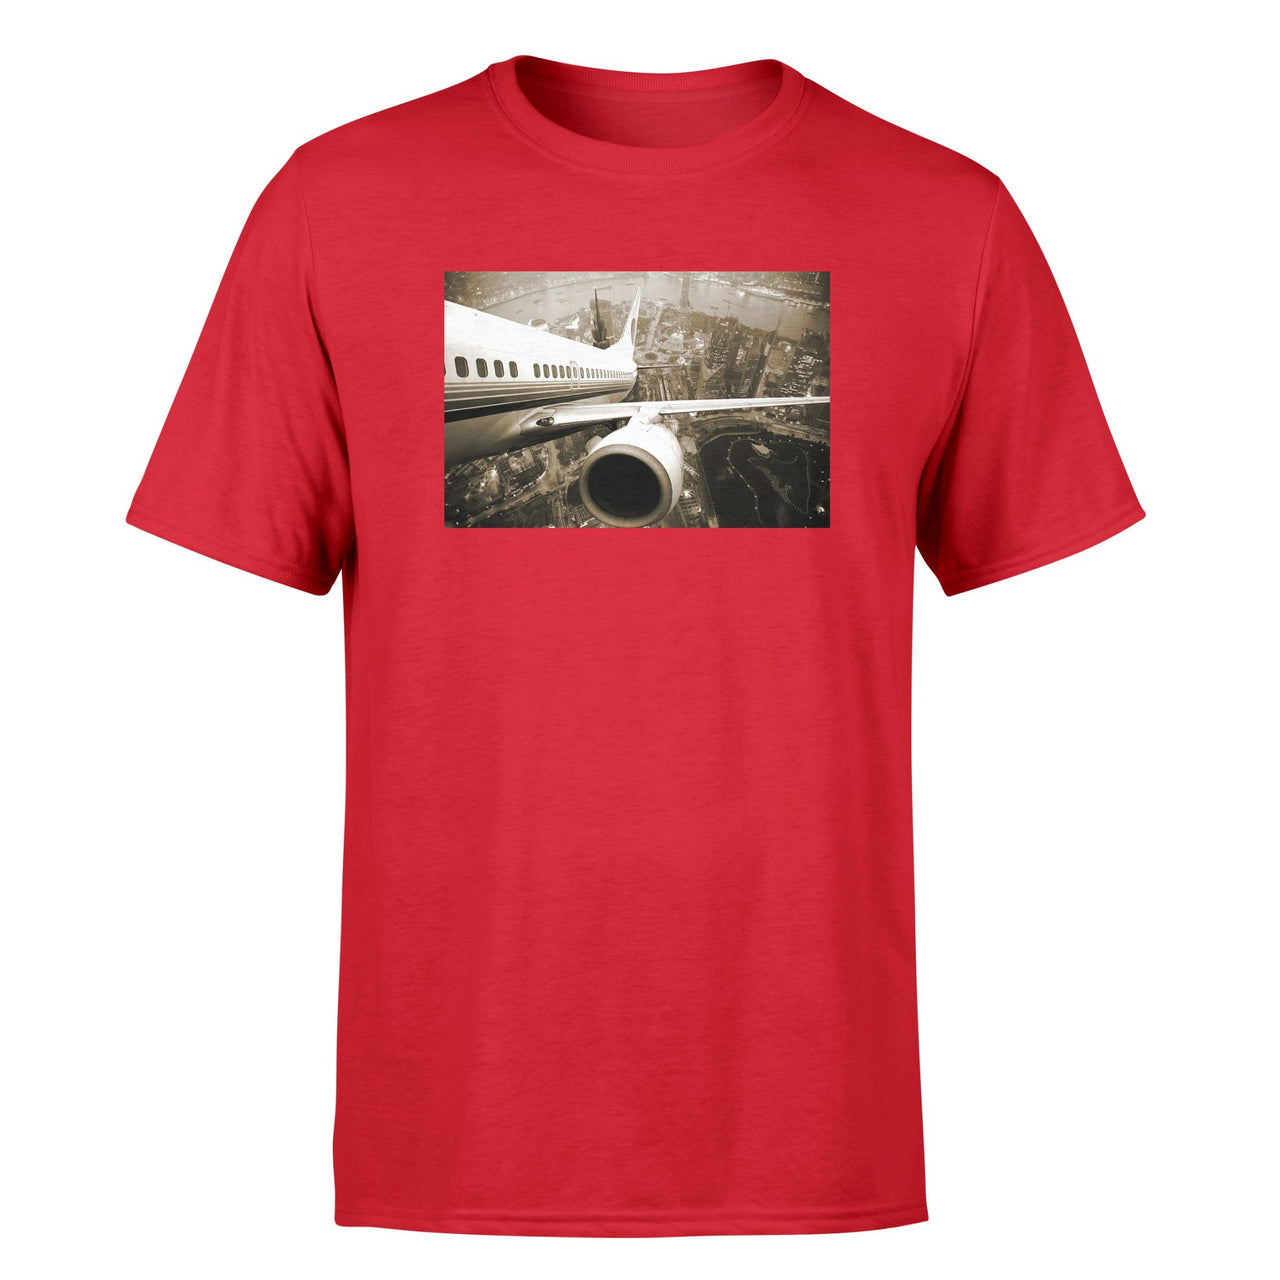 Departing Aircraft & City Scene behind Designed T-Shirts